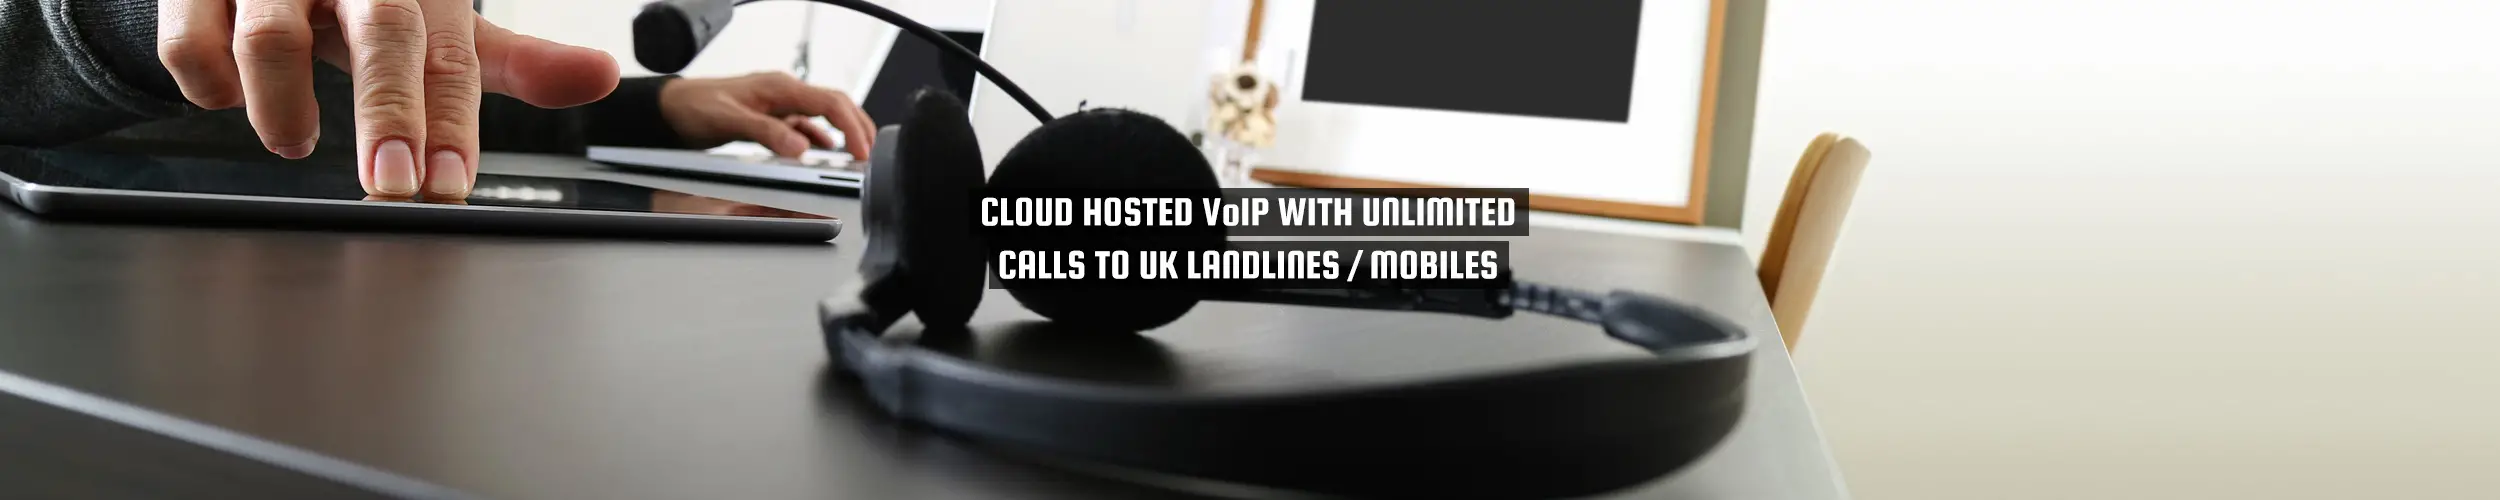 Cloud hosted VoIP with unlimited calls to UK landlines / Mobiles from 52 Degrees